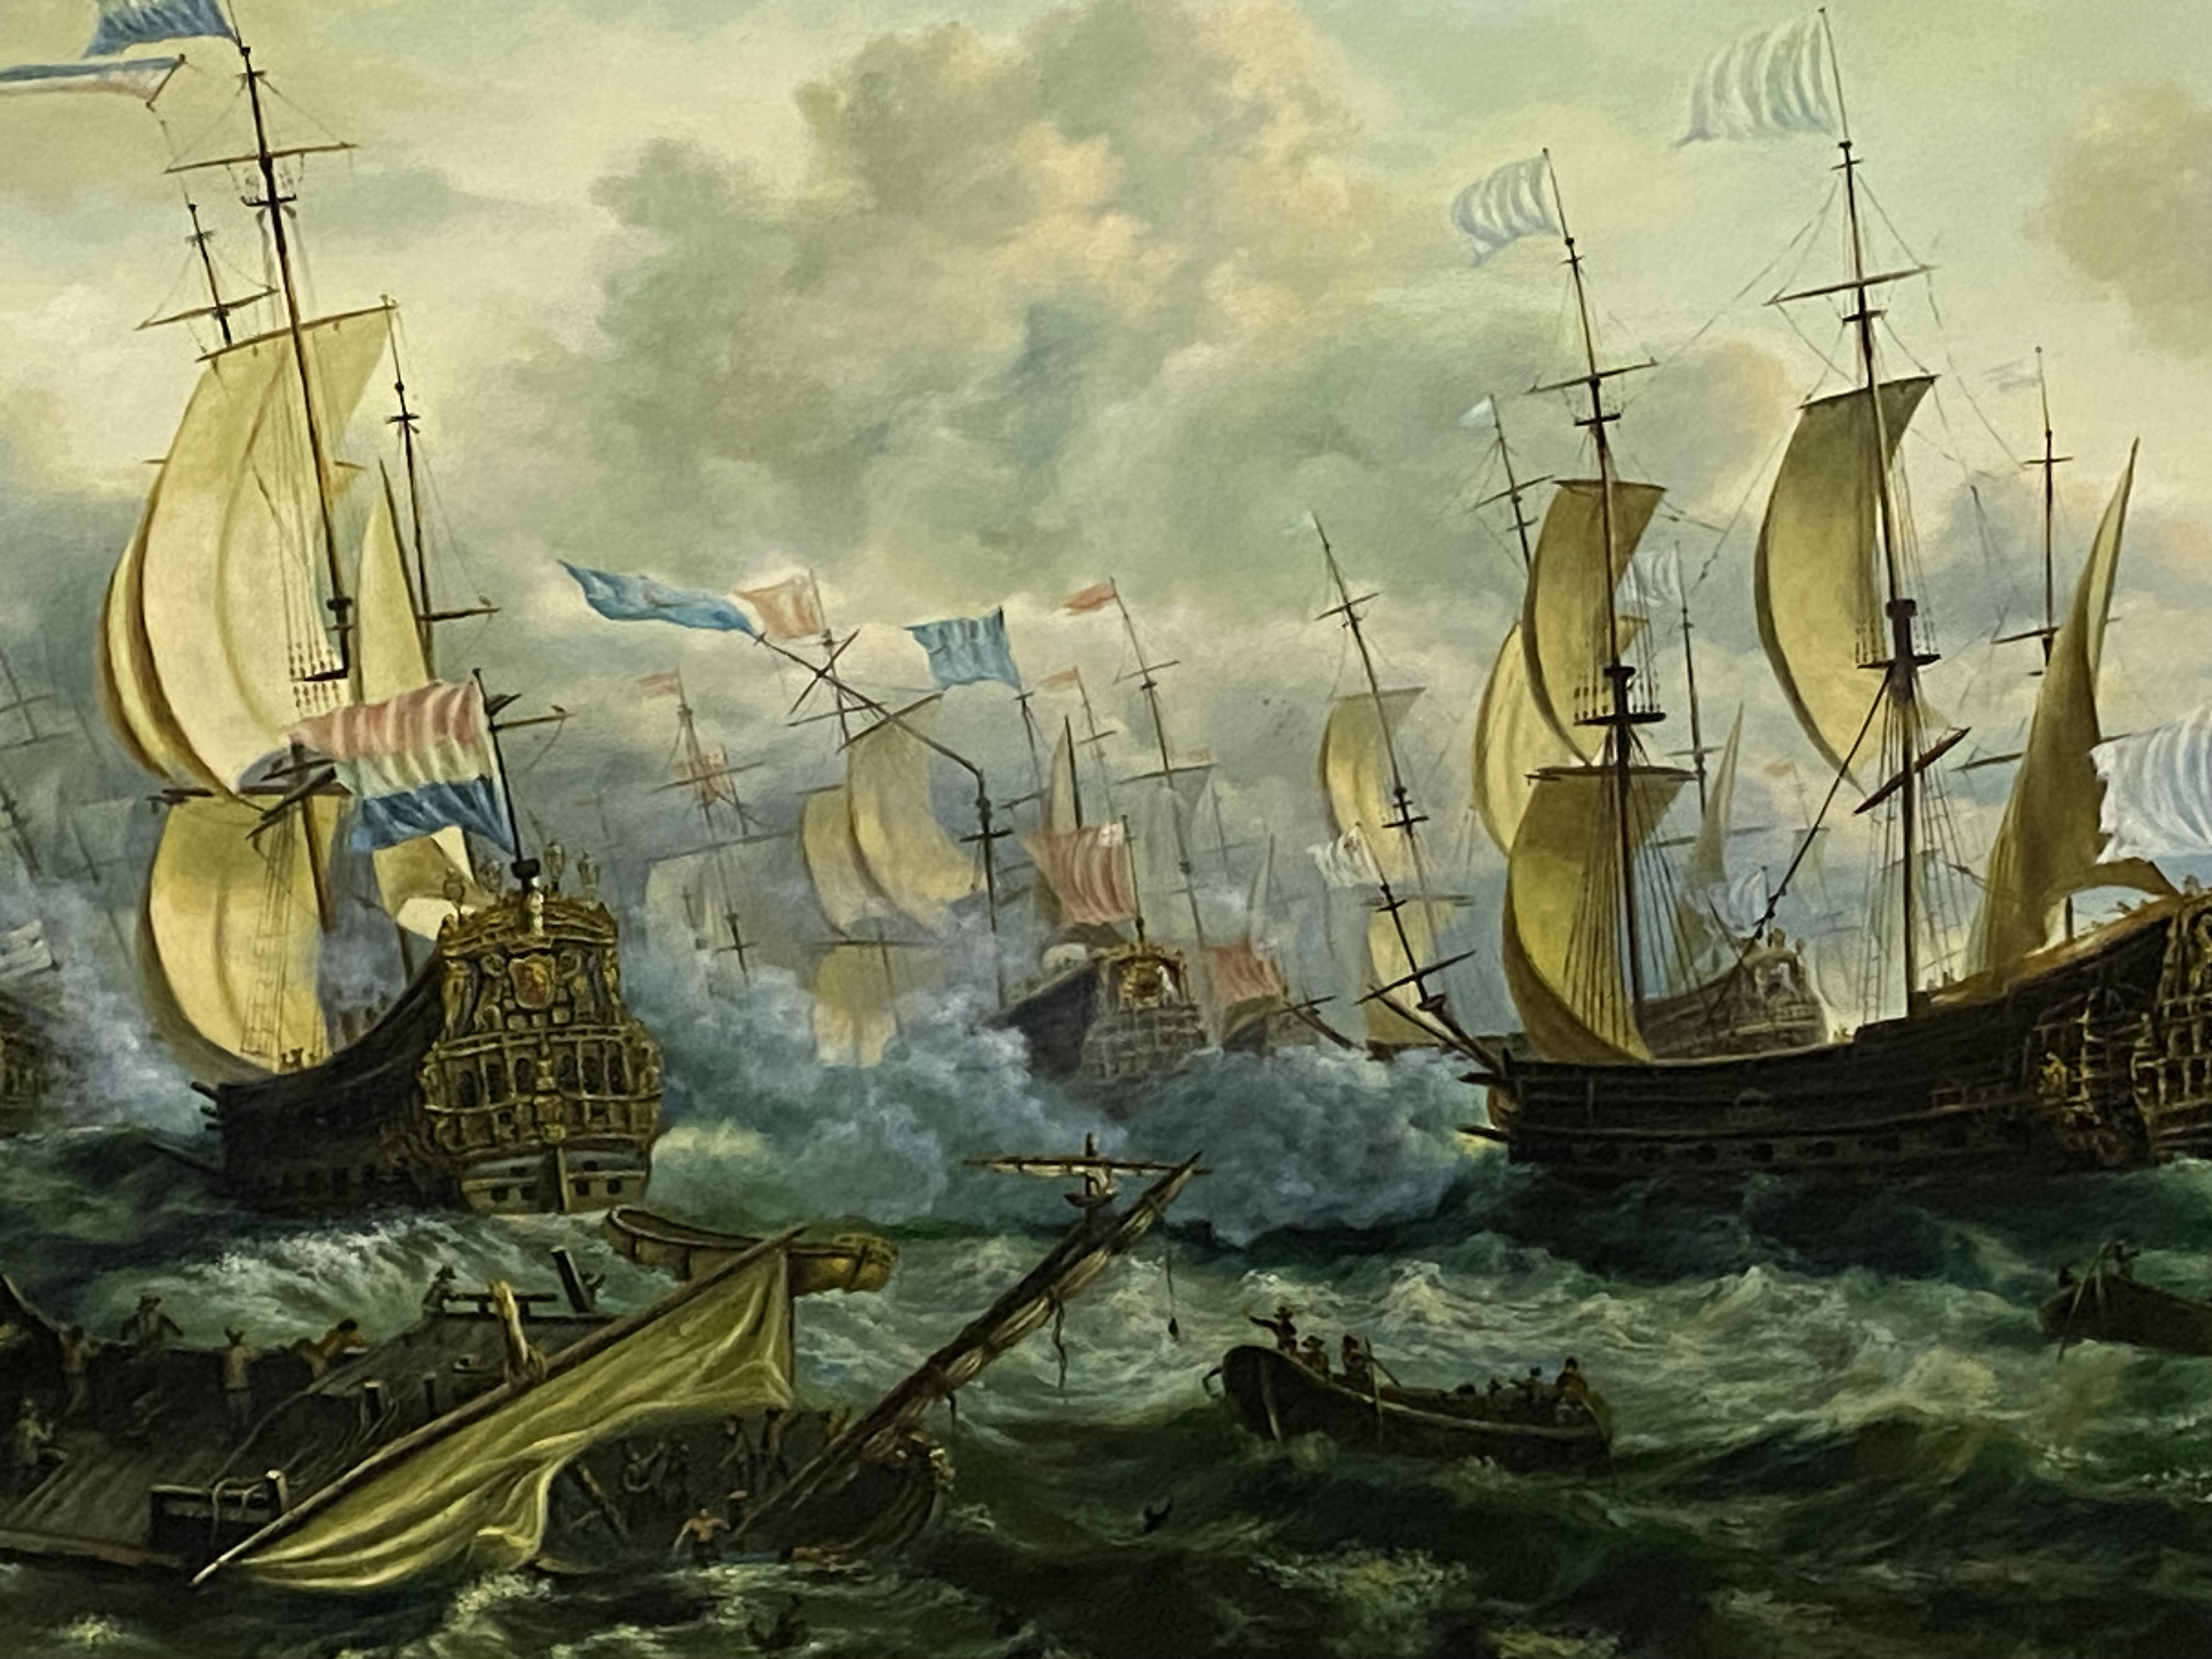 Framed oil on canvas of a naval battle